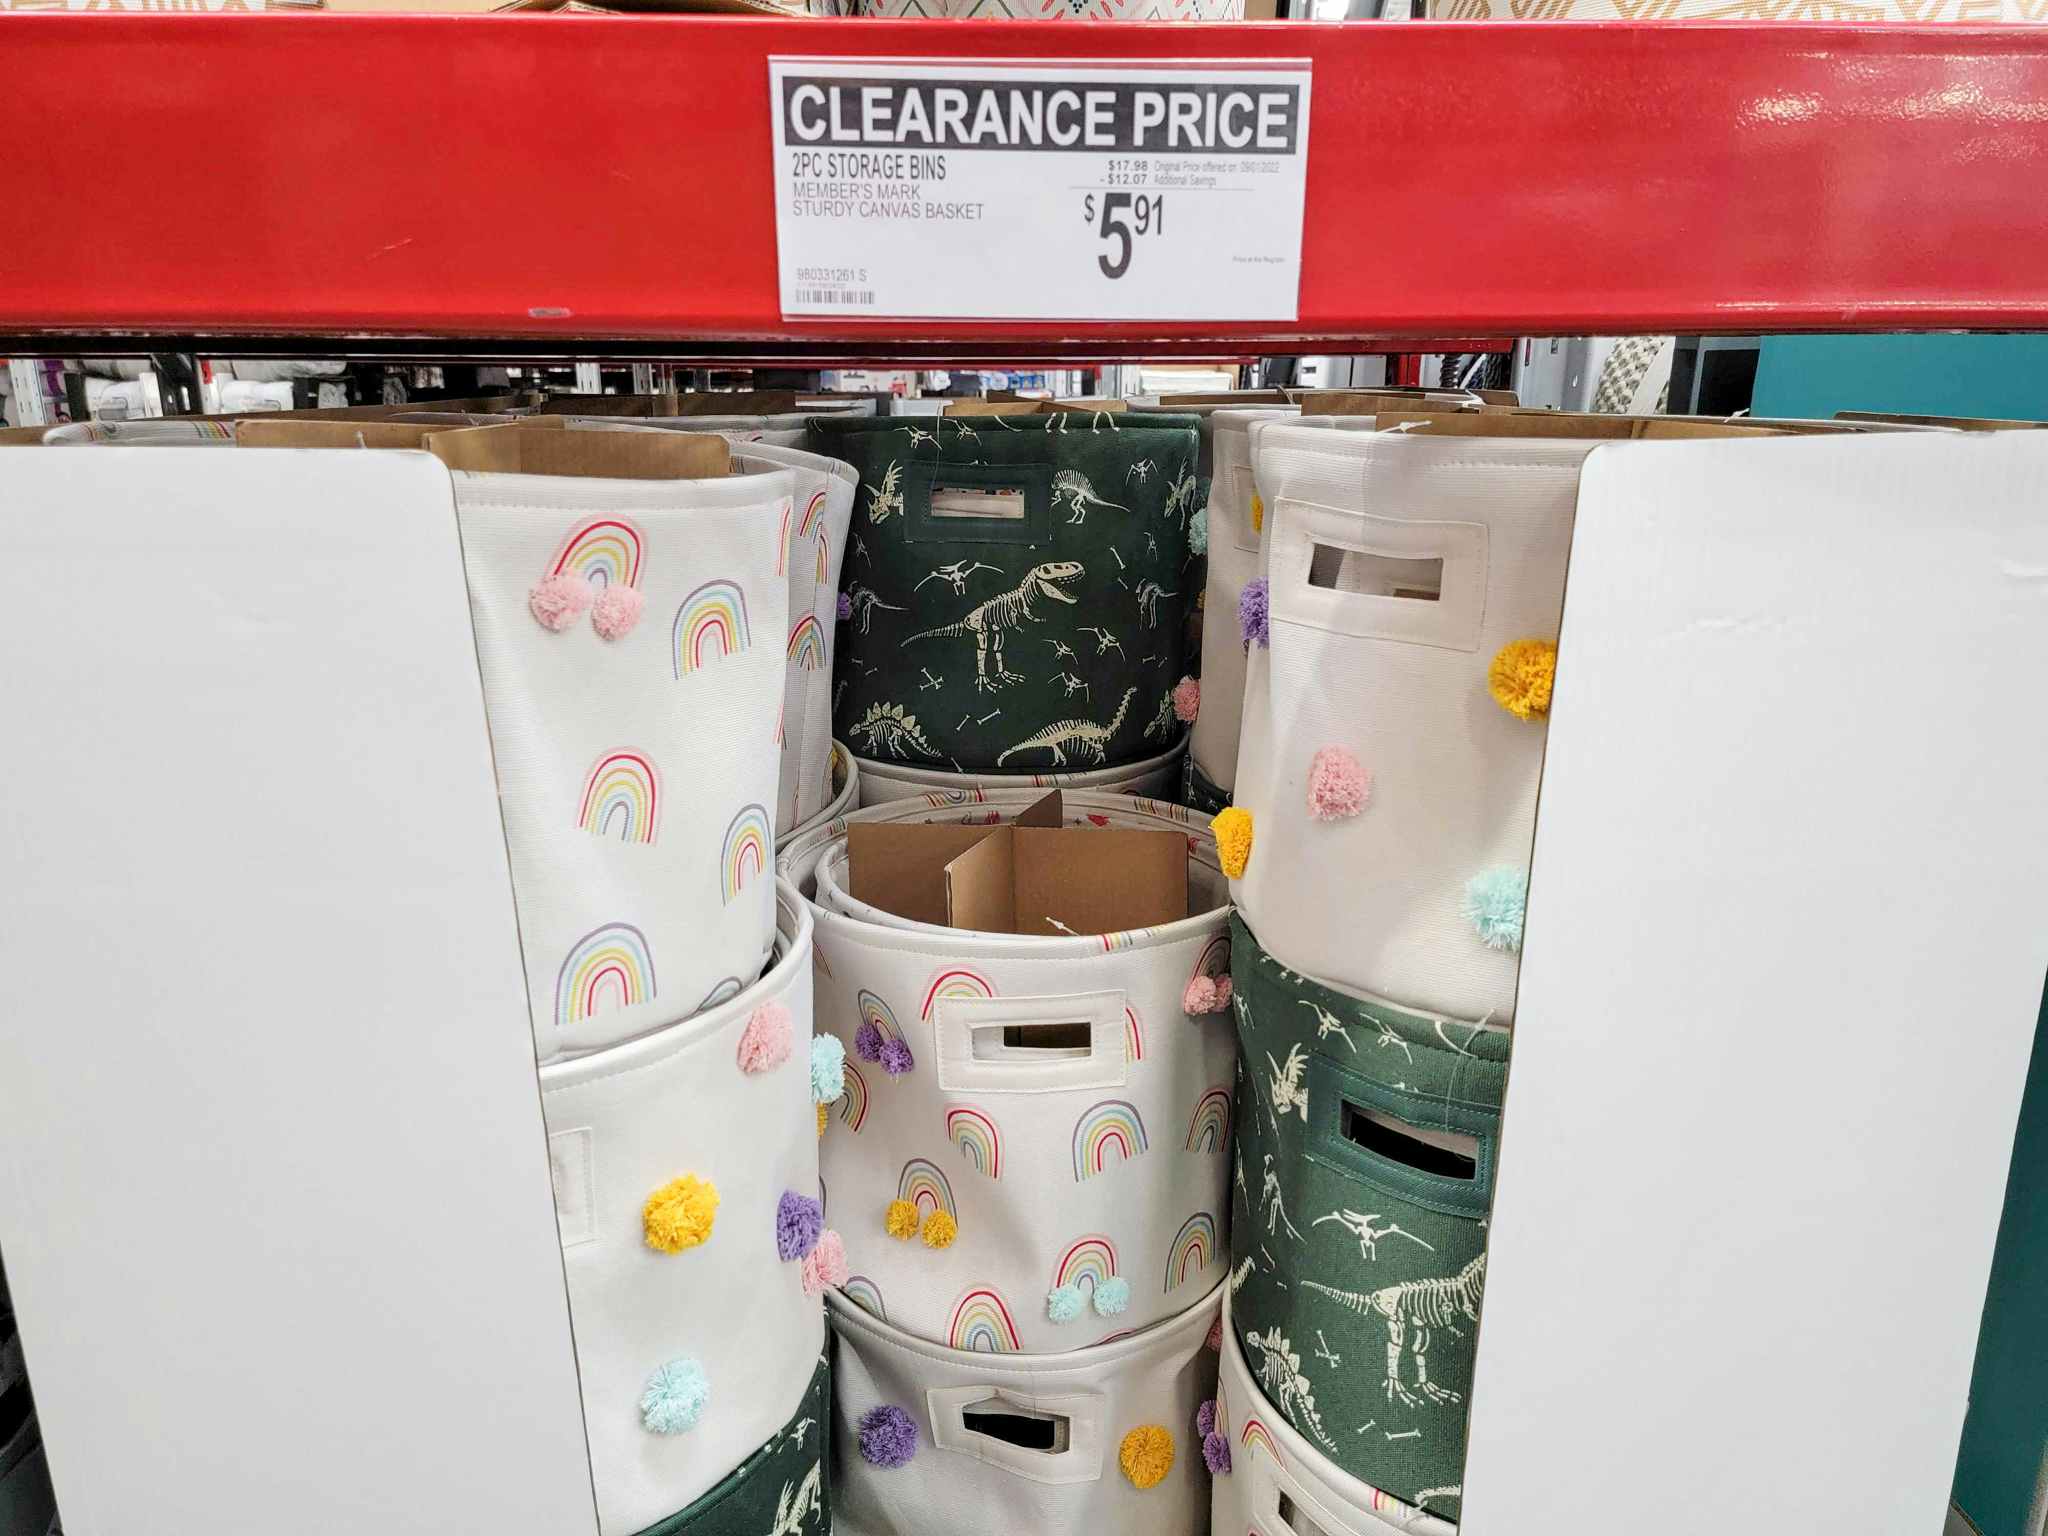 canvas storage bin 2-packs with a clearance sign for 5.91